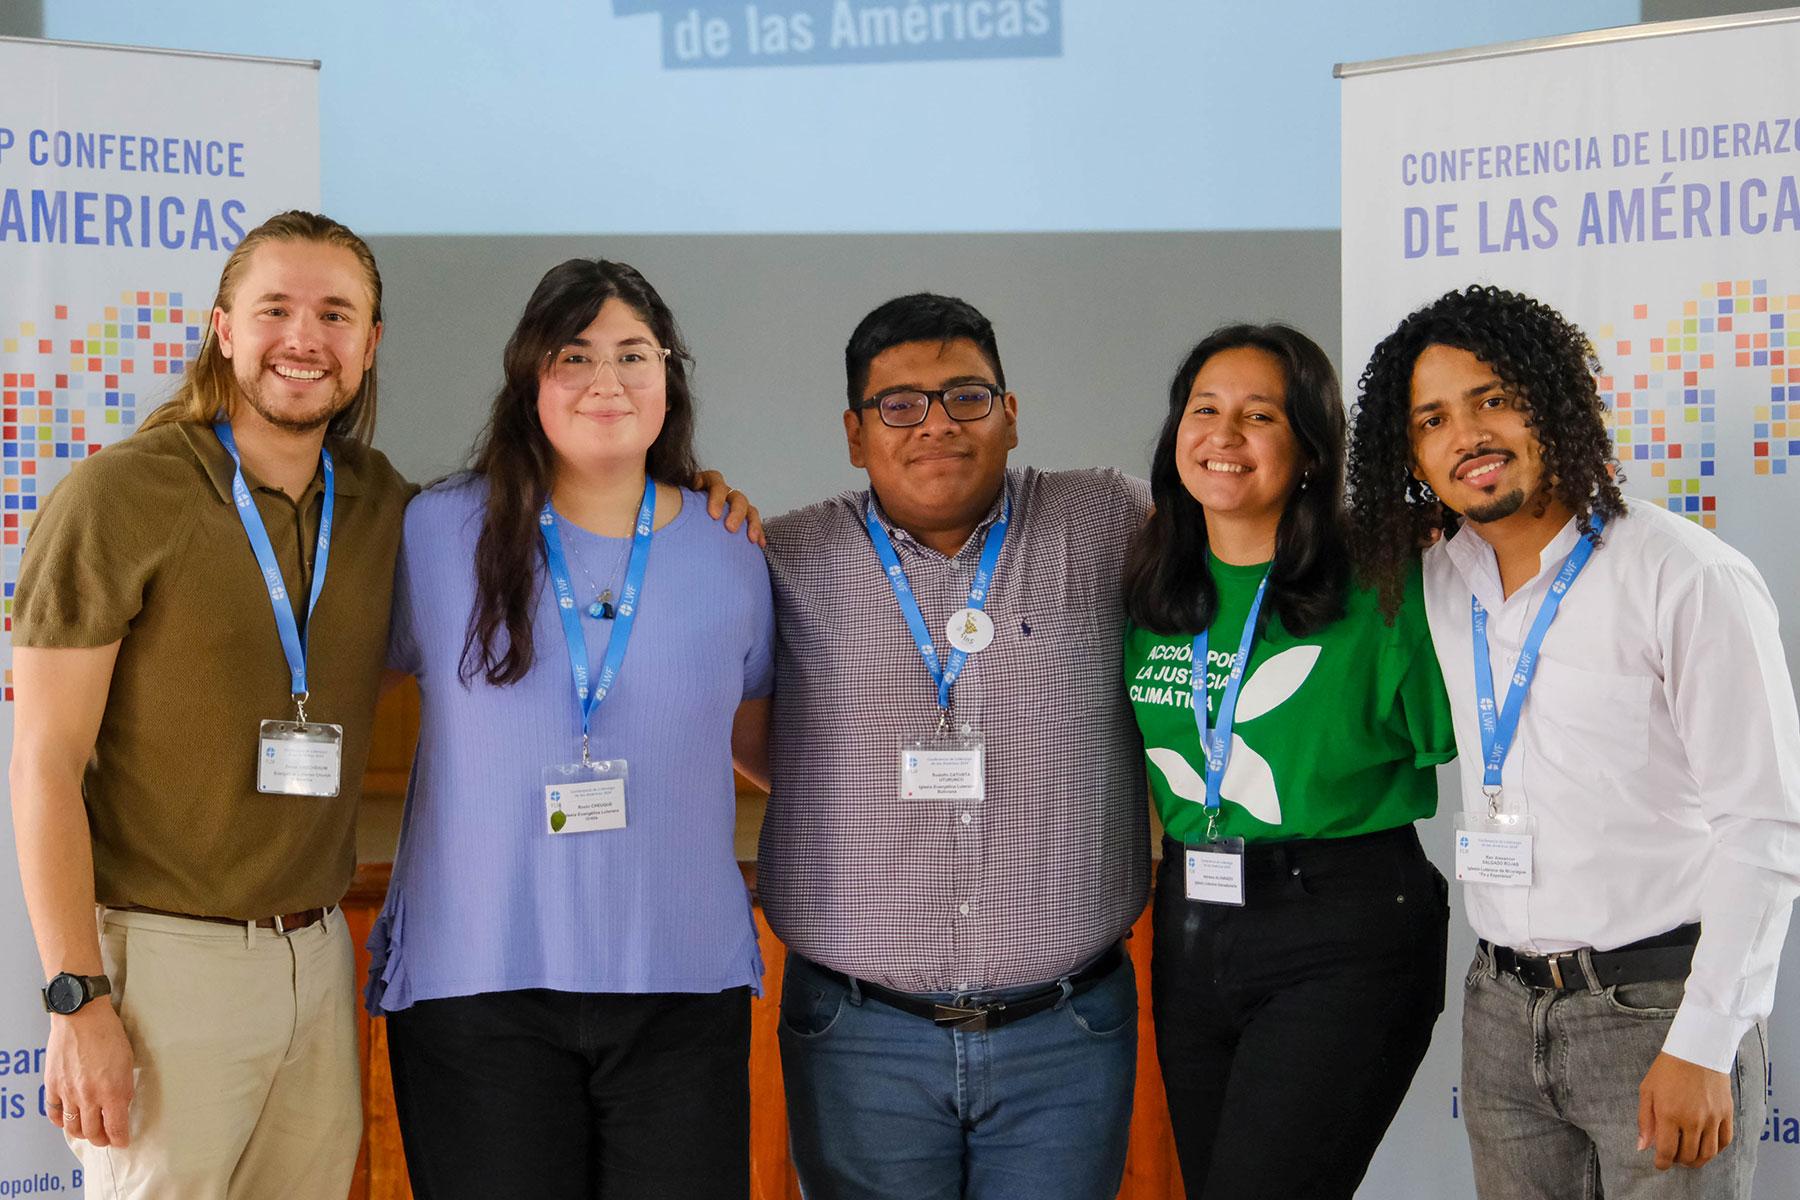 The coordinators of the youth networks of the Americas are (from left) Daniel Kirschbaum (Evangelical Lutheran Church in America - ELCA), Rocío Cheuque (United Evangelical Lutheran Church, Argentina - IELU), Rodolfo Catunta Uturunco (Bolivian Evangelical Lutheran Church - IELB), Belinda Colindres Matamoros (Christian Lutheran Church of Honduras - ICLH), and Ken Salgado Rojas (The Nicaraguan Lutheran Church of Faith and Hope - ILFE). Photo: LWF/Gabriela Giese